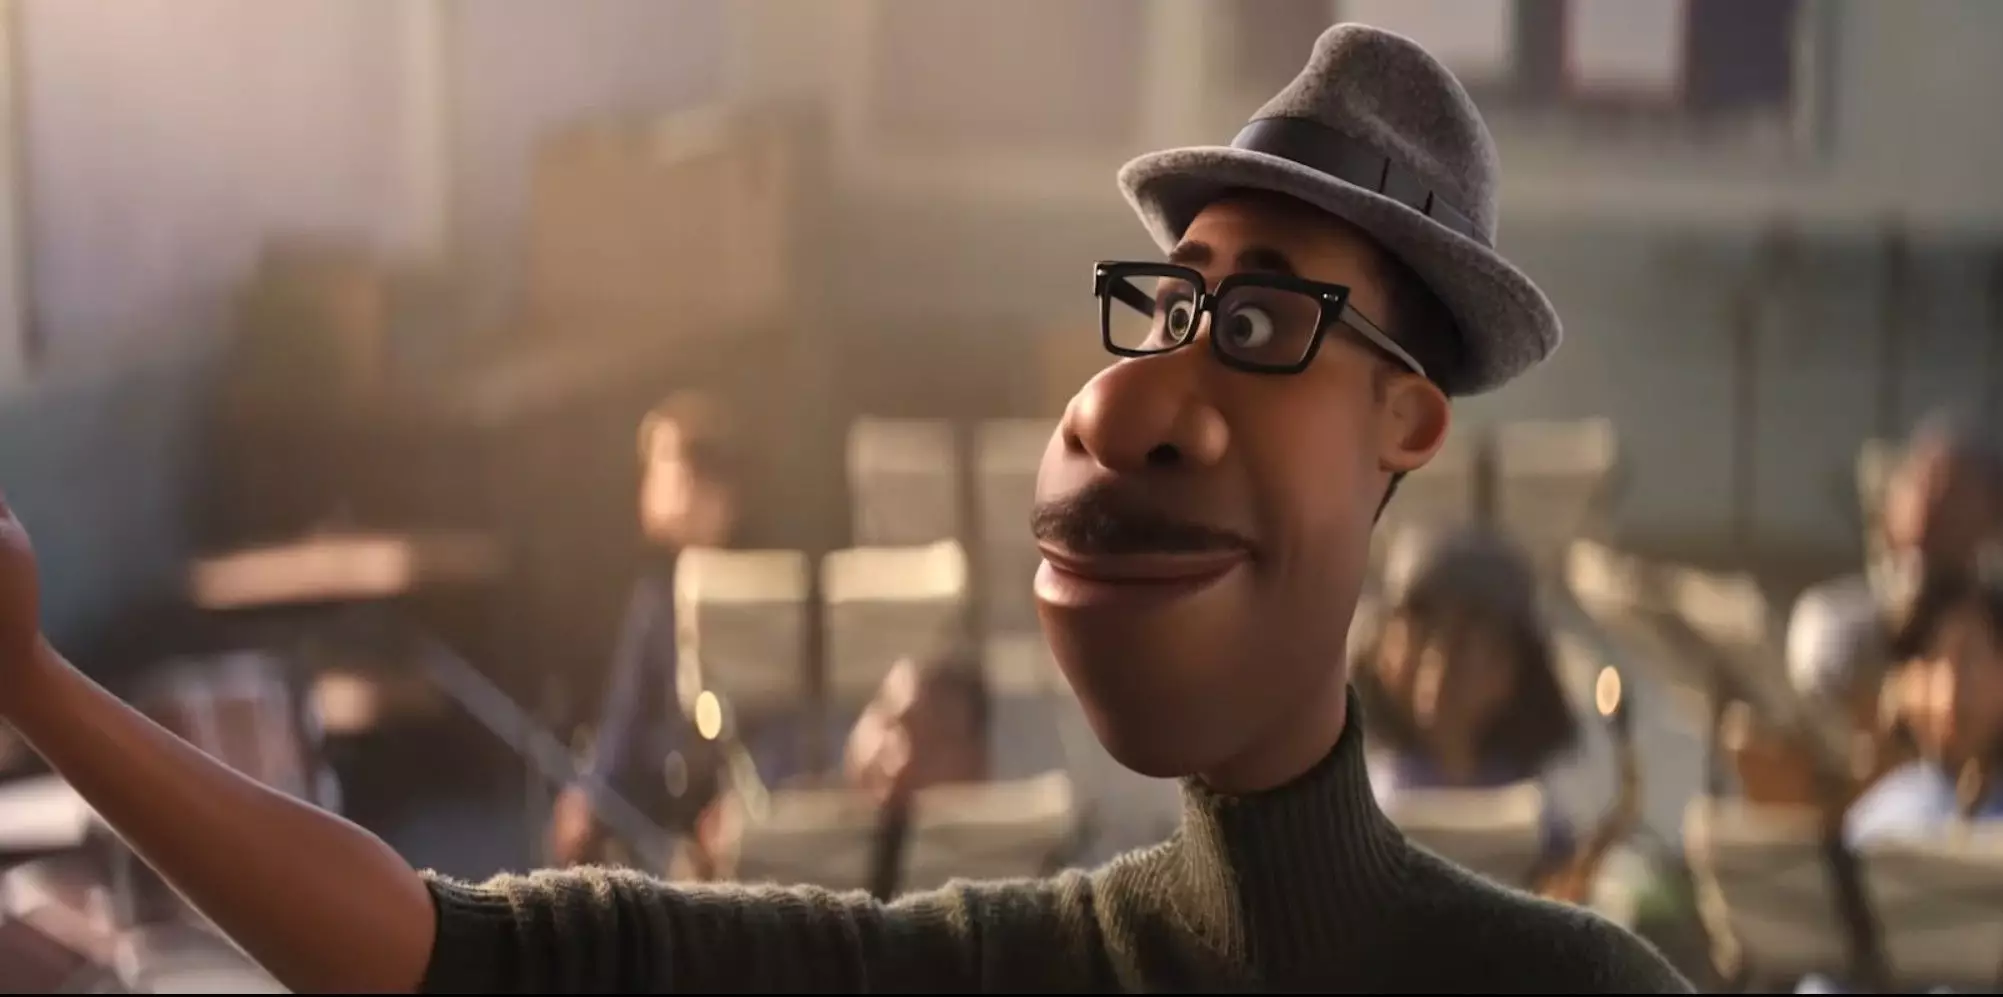 Soul is Pixar's first film to feature an African-American lead character. Joe is voiced by Jamie Foxx (